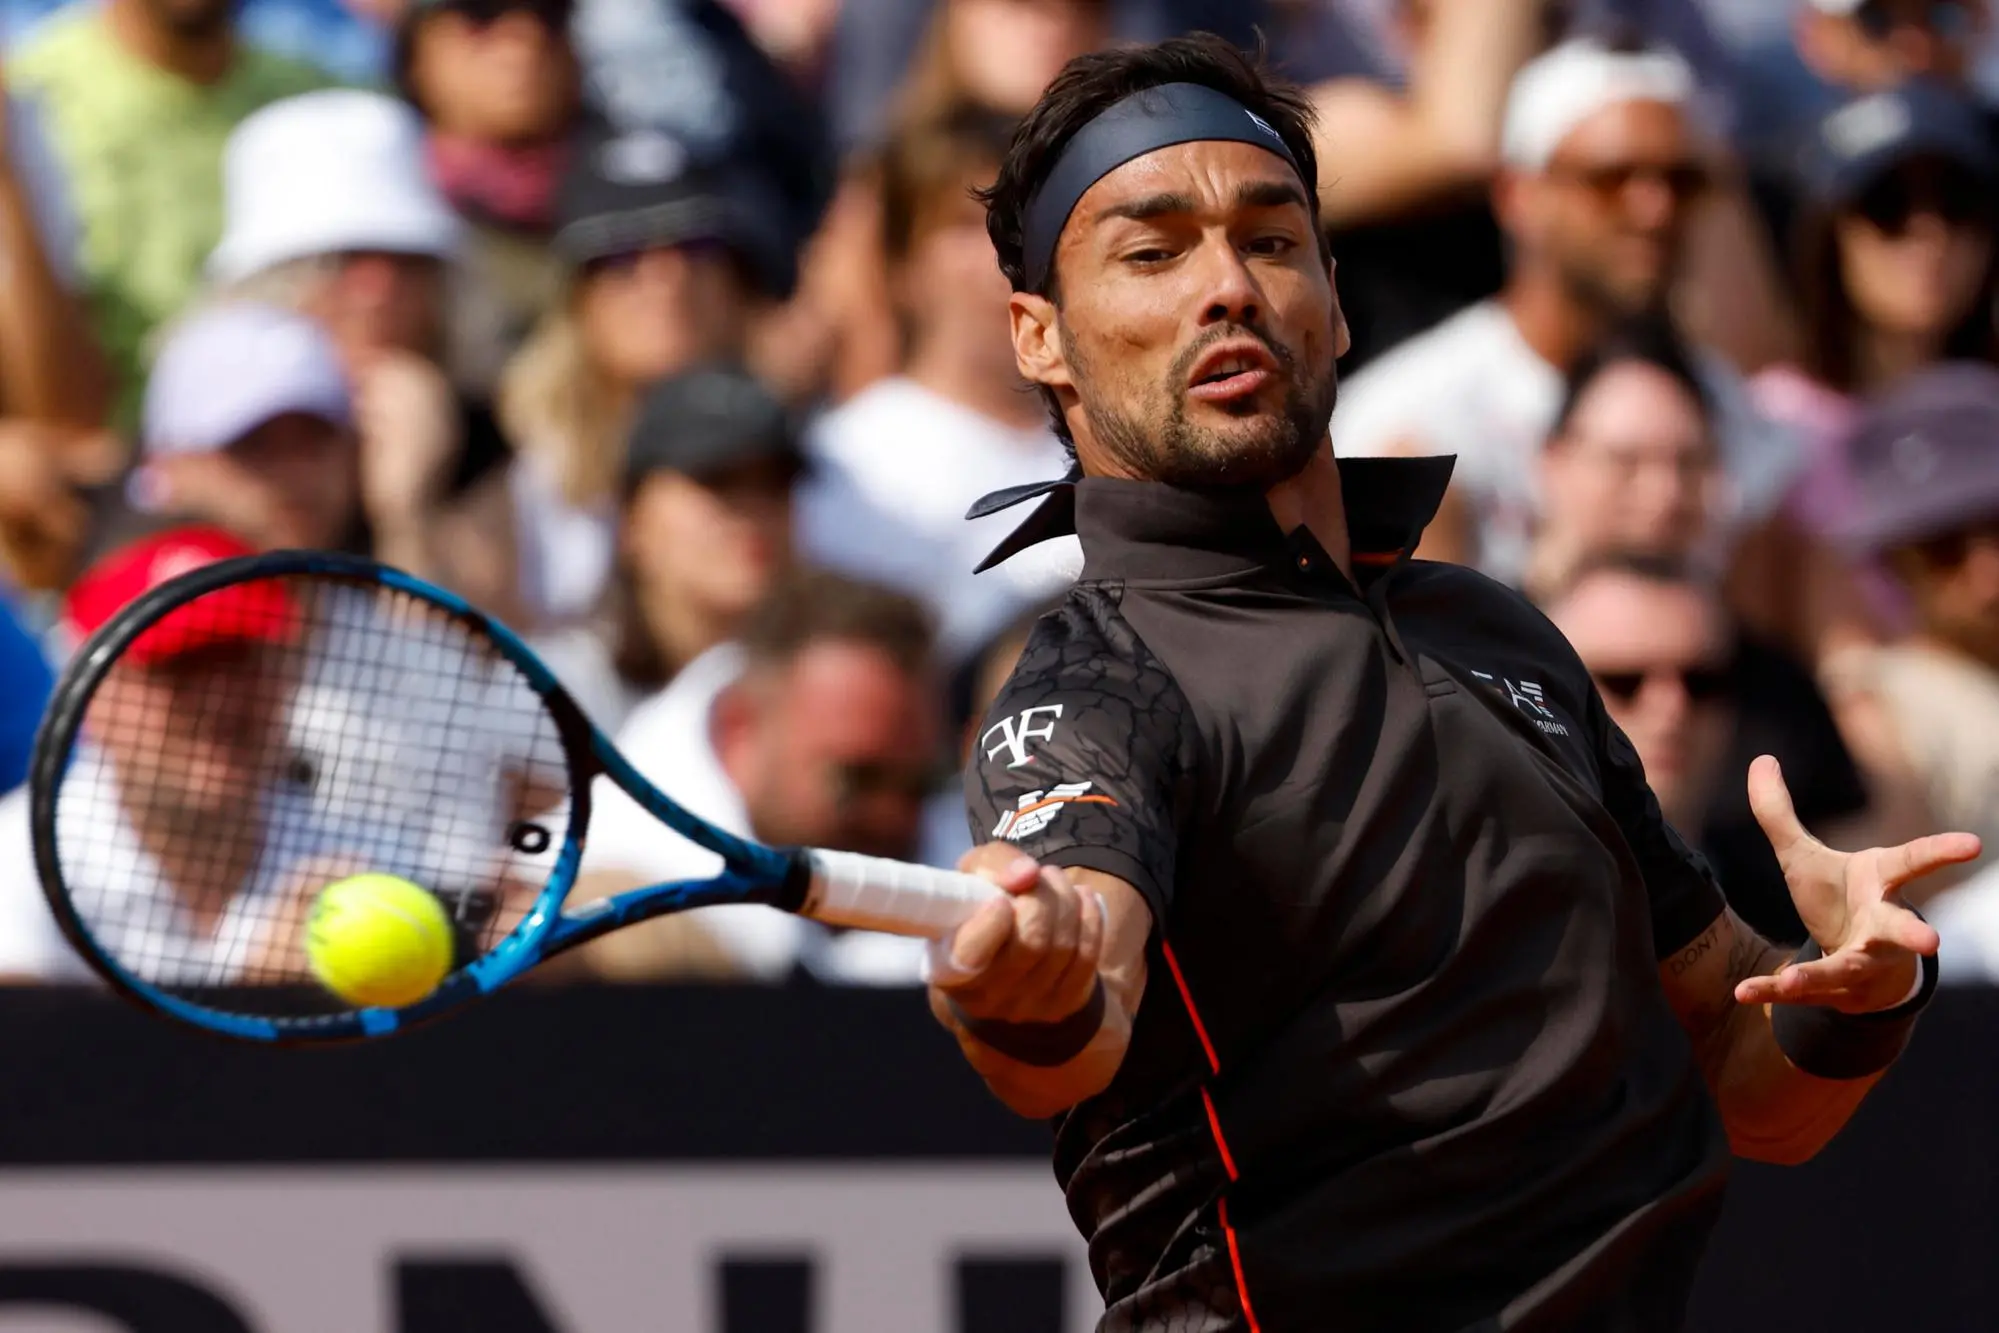 Fabio Fognini of Italy in action during his men's singles second round match against Miomir Kecmanovic from Serbia (not pictured) at the Italian Open tennis tournament in Rome, Italy, 12 May 2023. ANSA/FABIO FRUSTACI